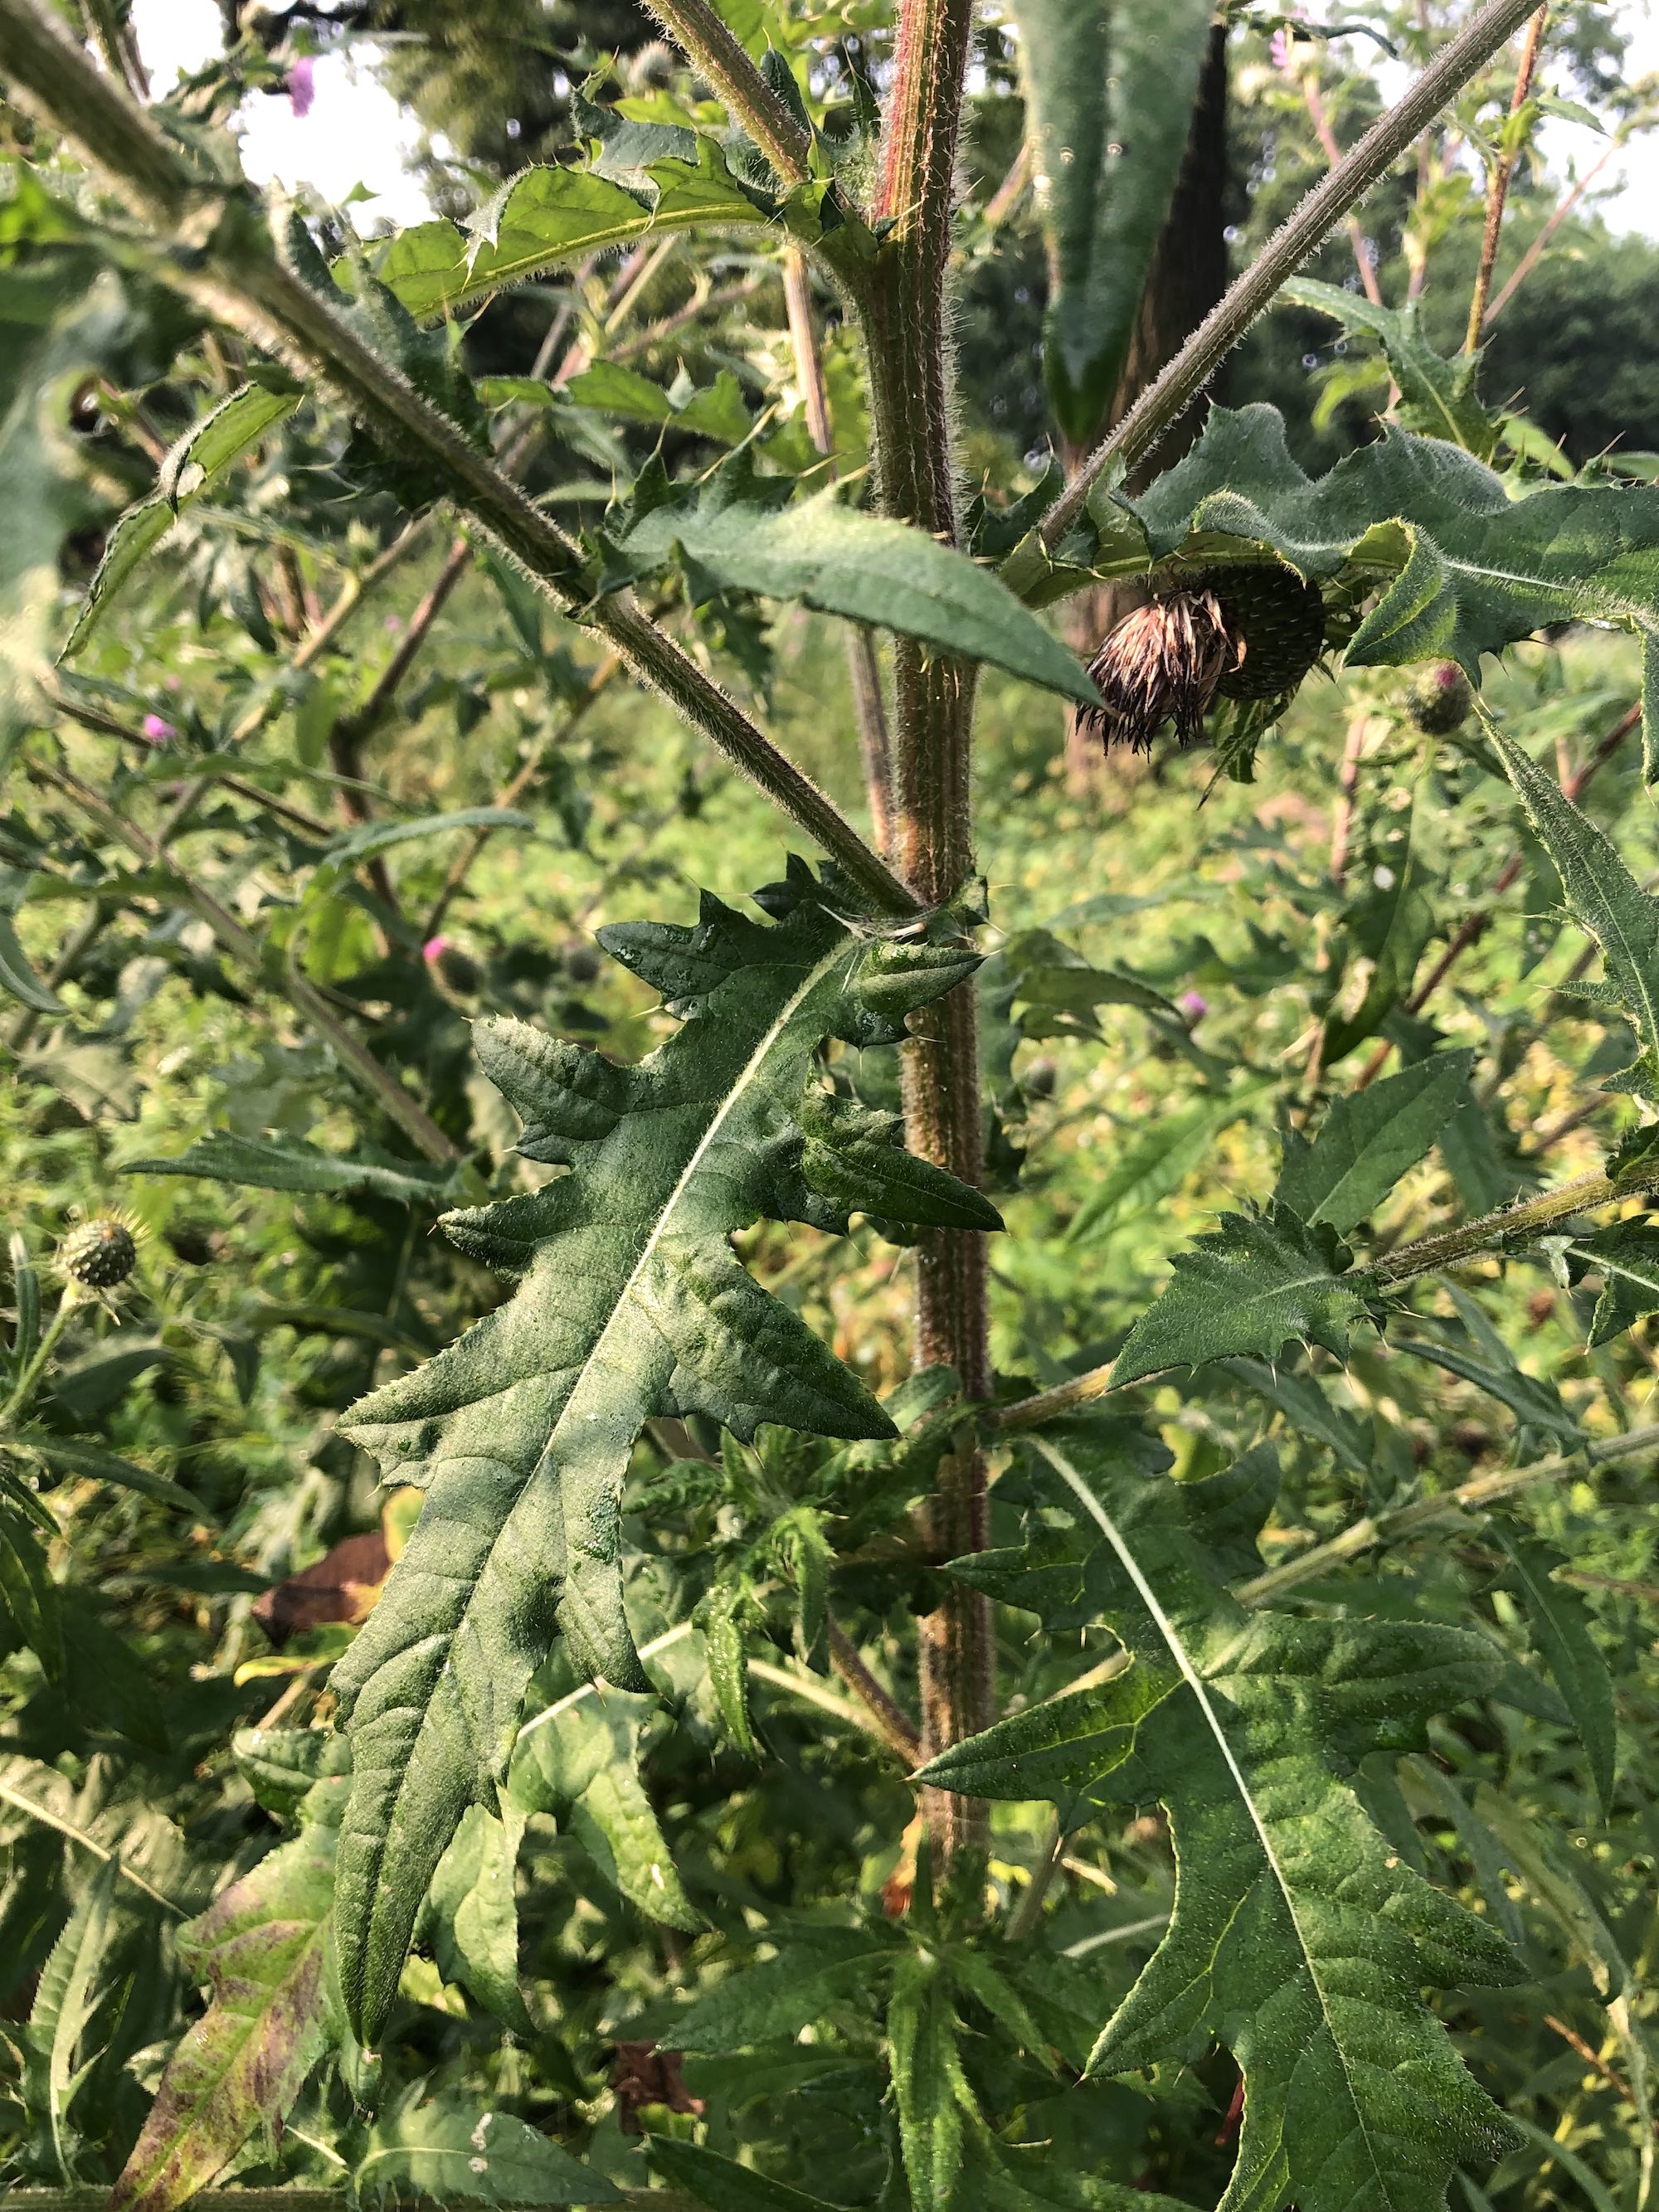 Tall Thistle stalk and mid level leaves in Oak Savanna in Madison, Wisconsin on August 8, 2022.